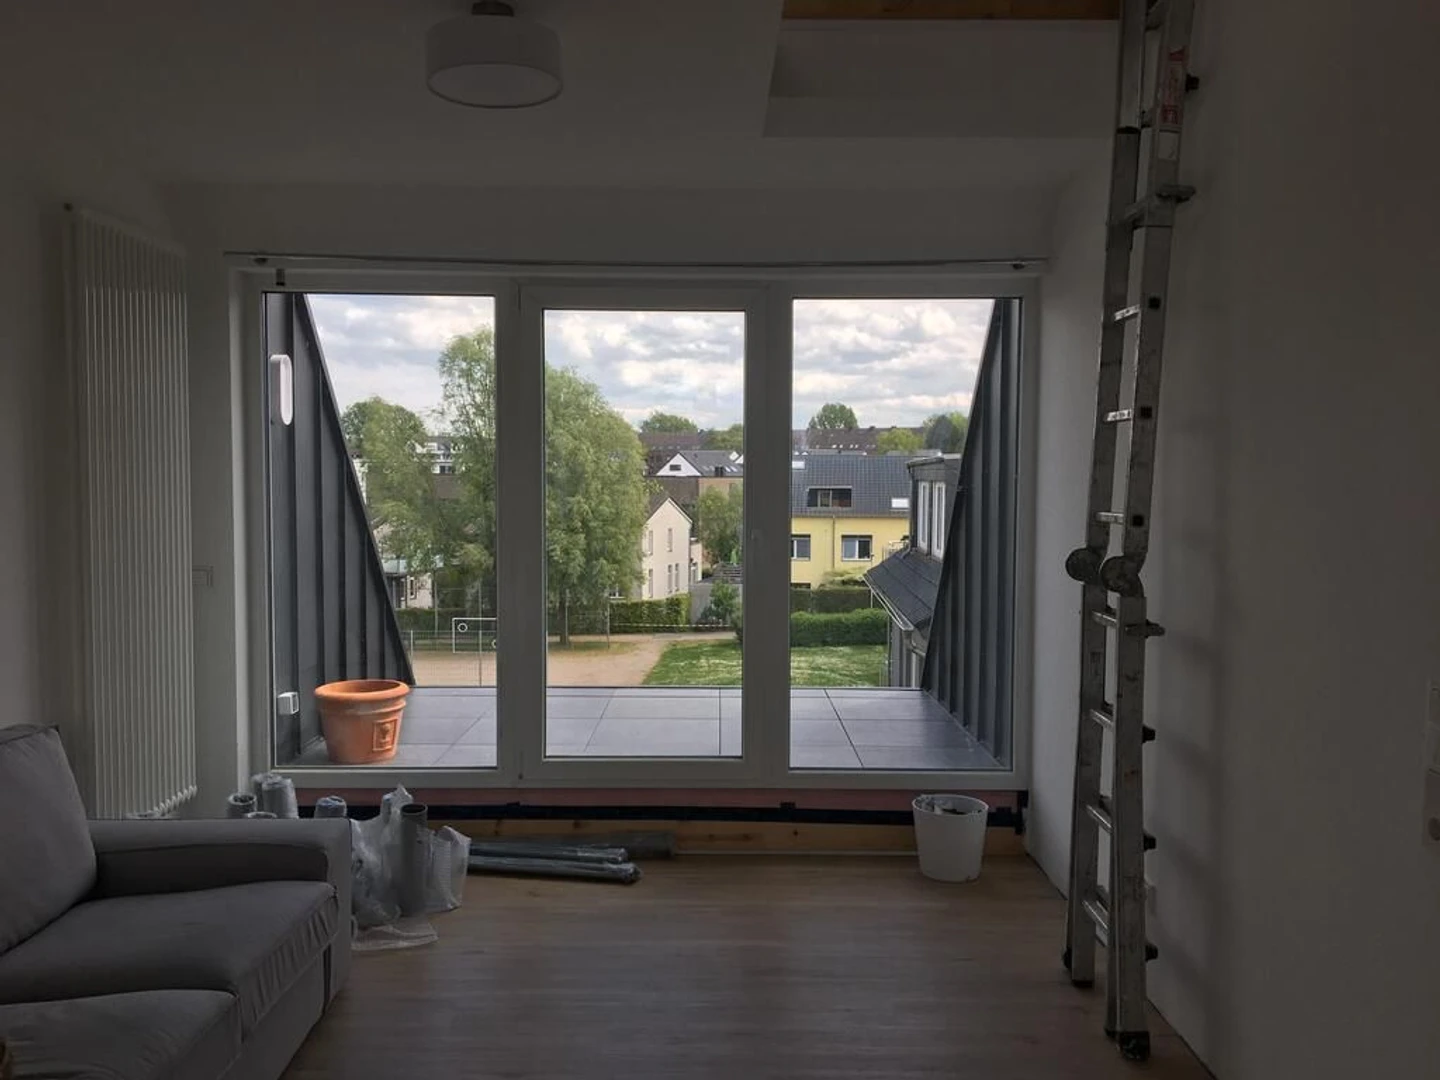 Room for rent in a shared flat in Aachen